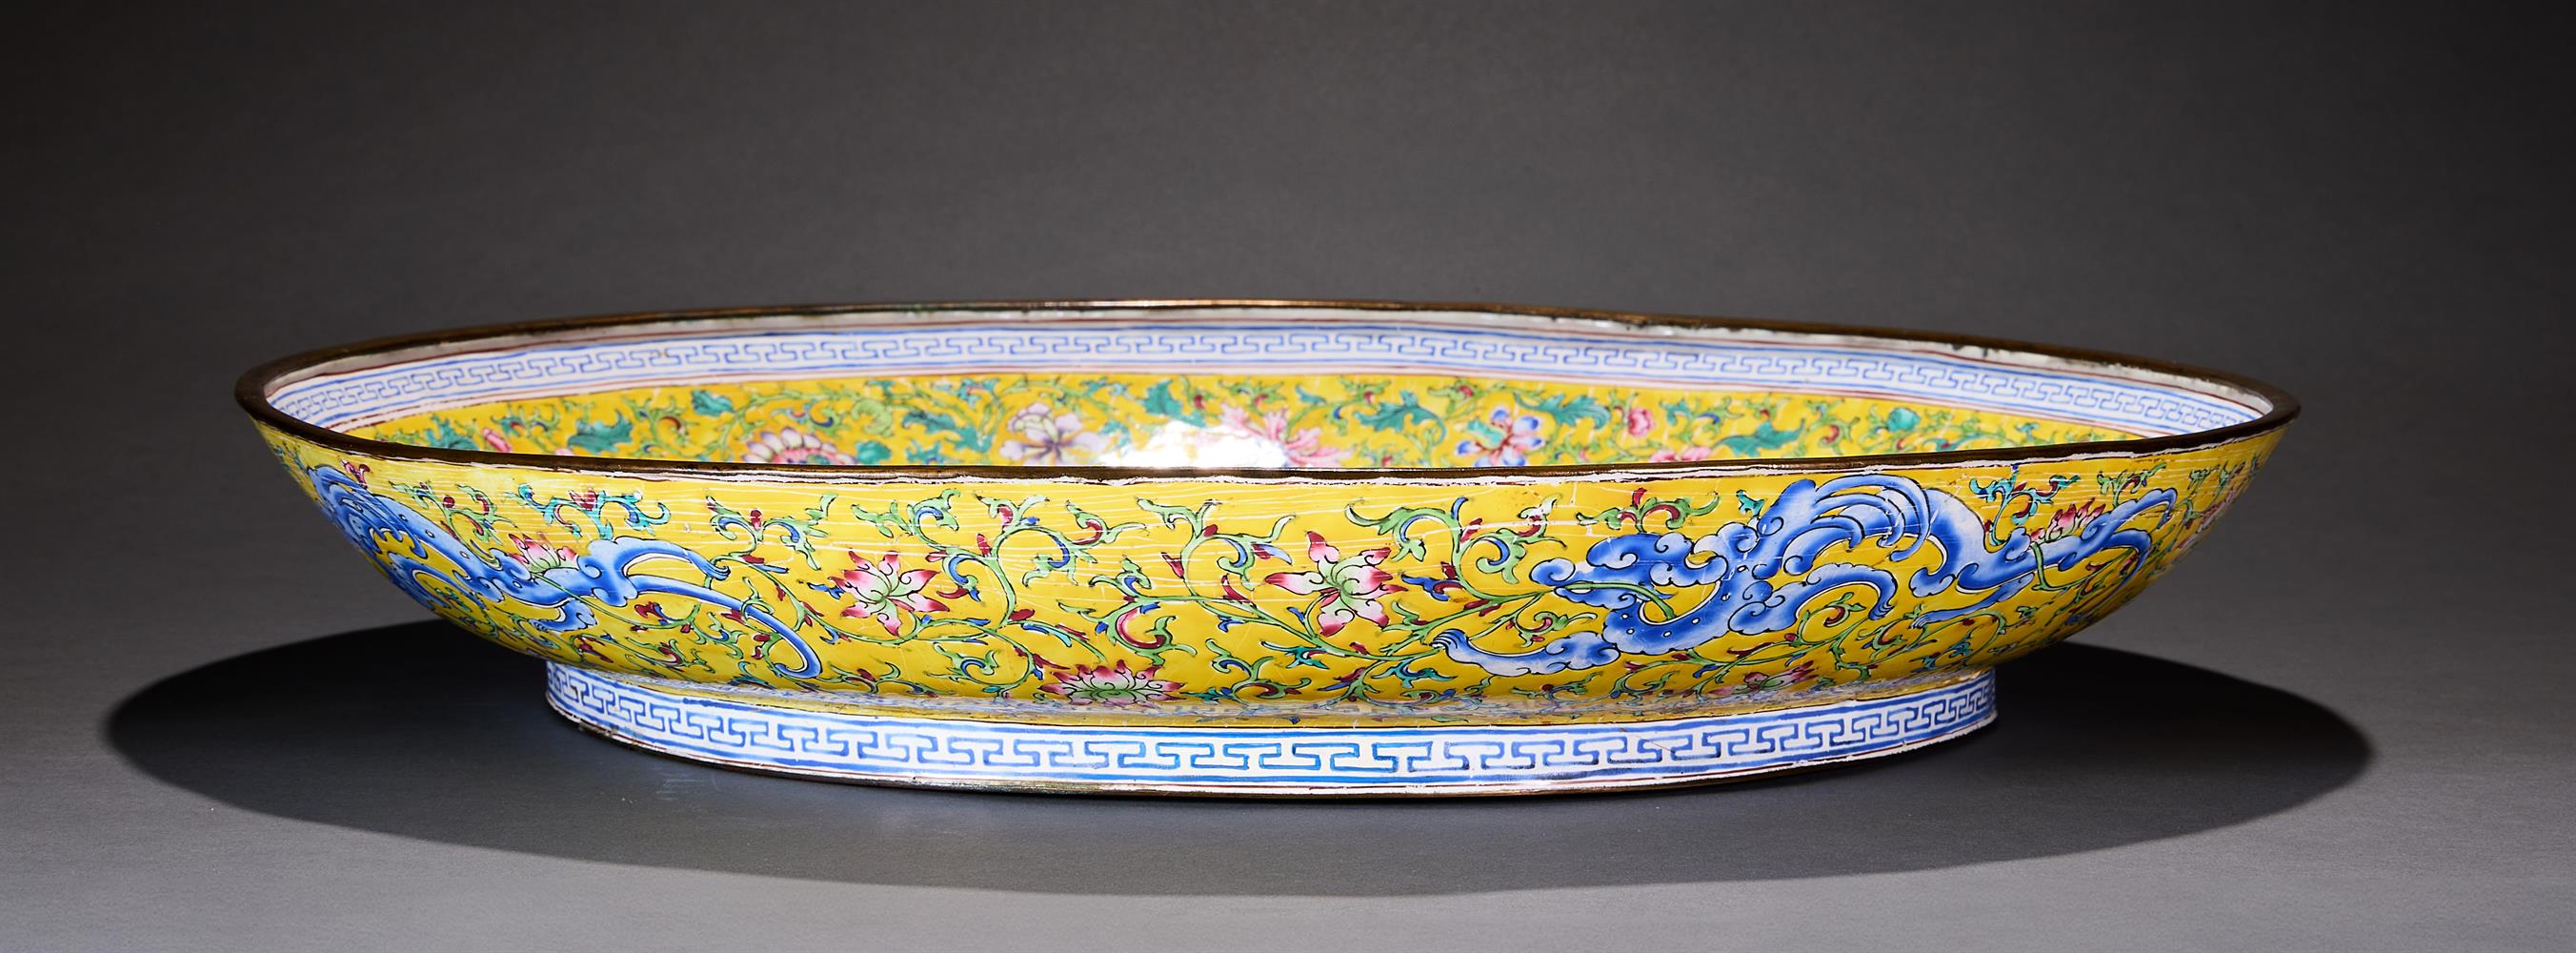 A LARGE CANTON ENAMEL 'FIVE SCHOLARS' DISH, QING DYNASTY - Image 3 of 5